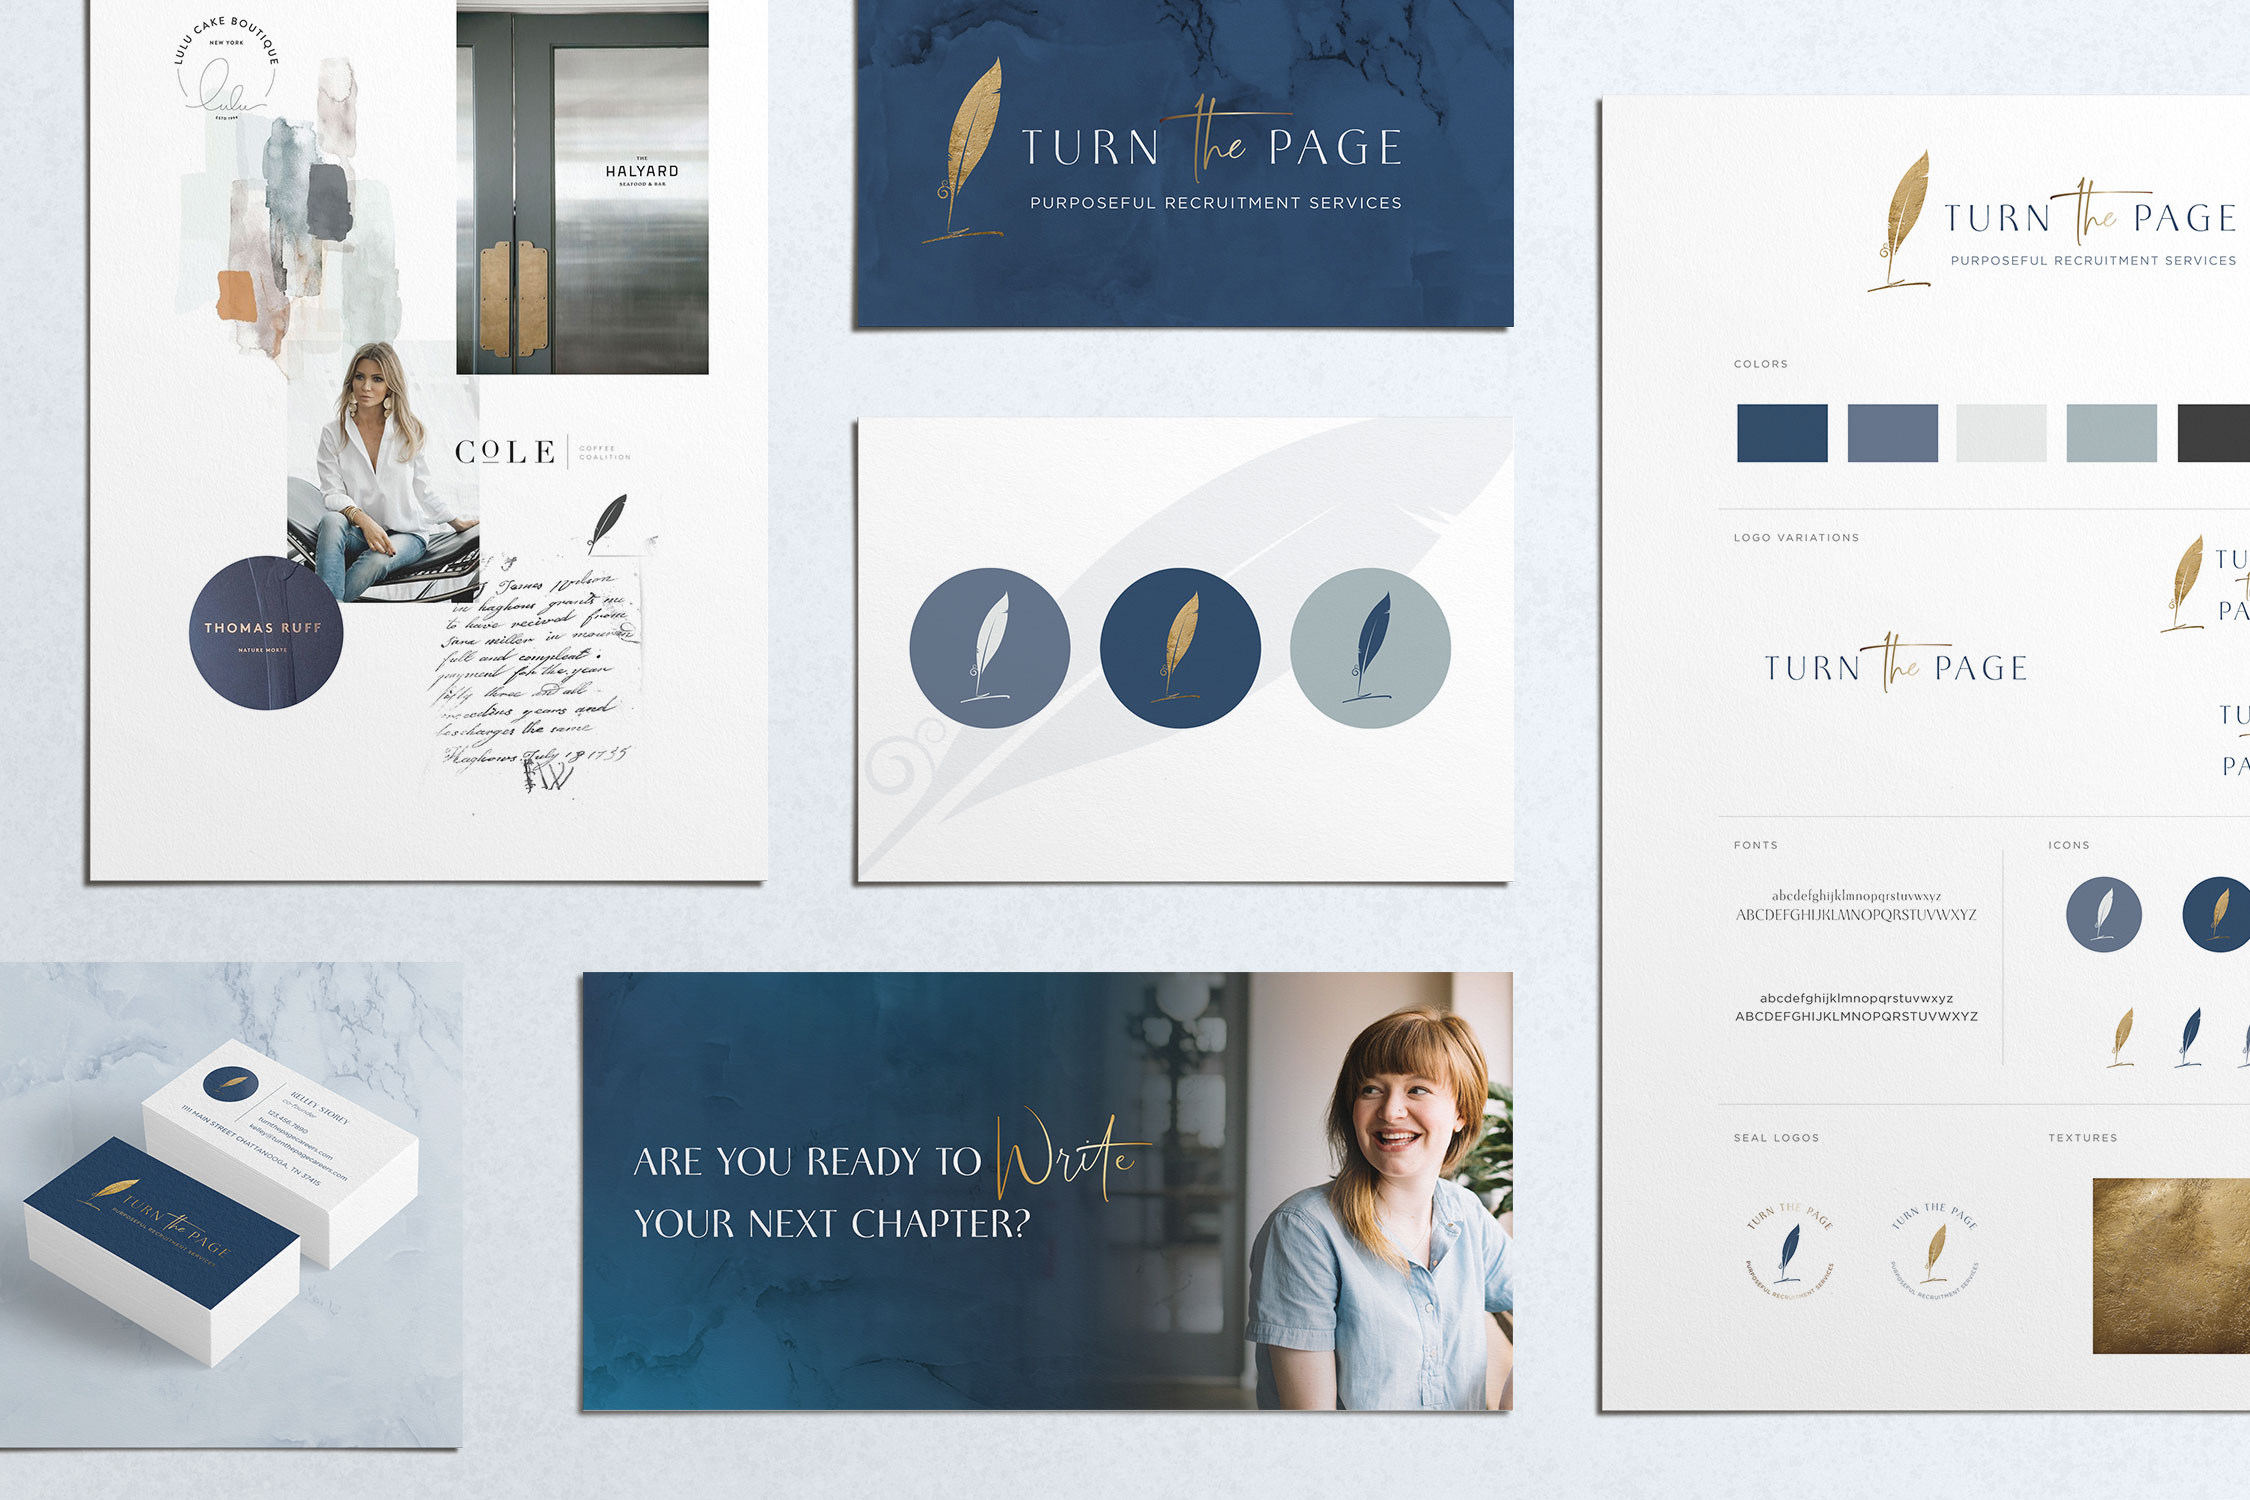 Logo design and branding for recruiter | Turn The Page Careers